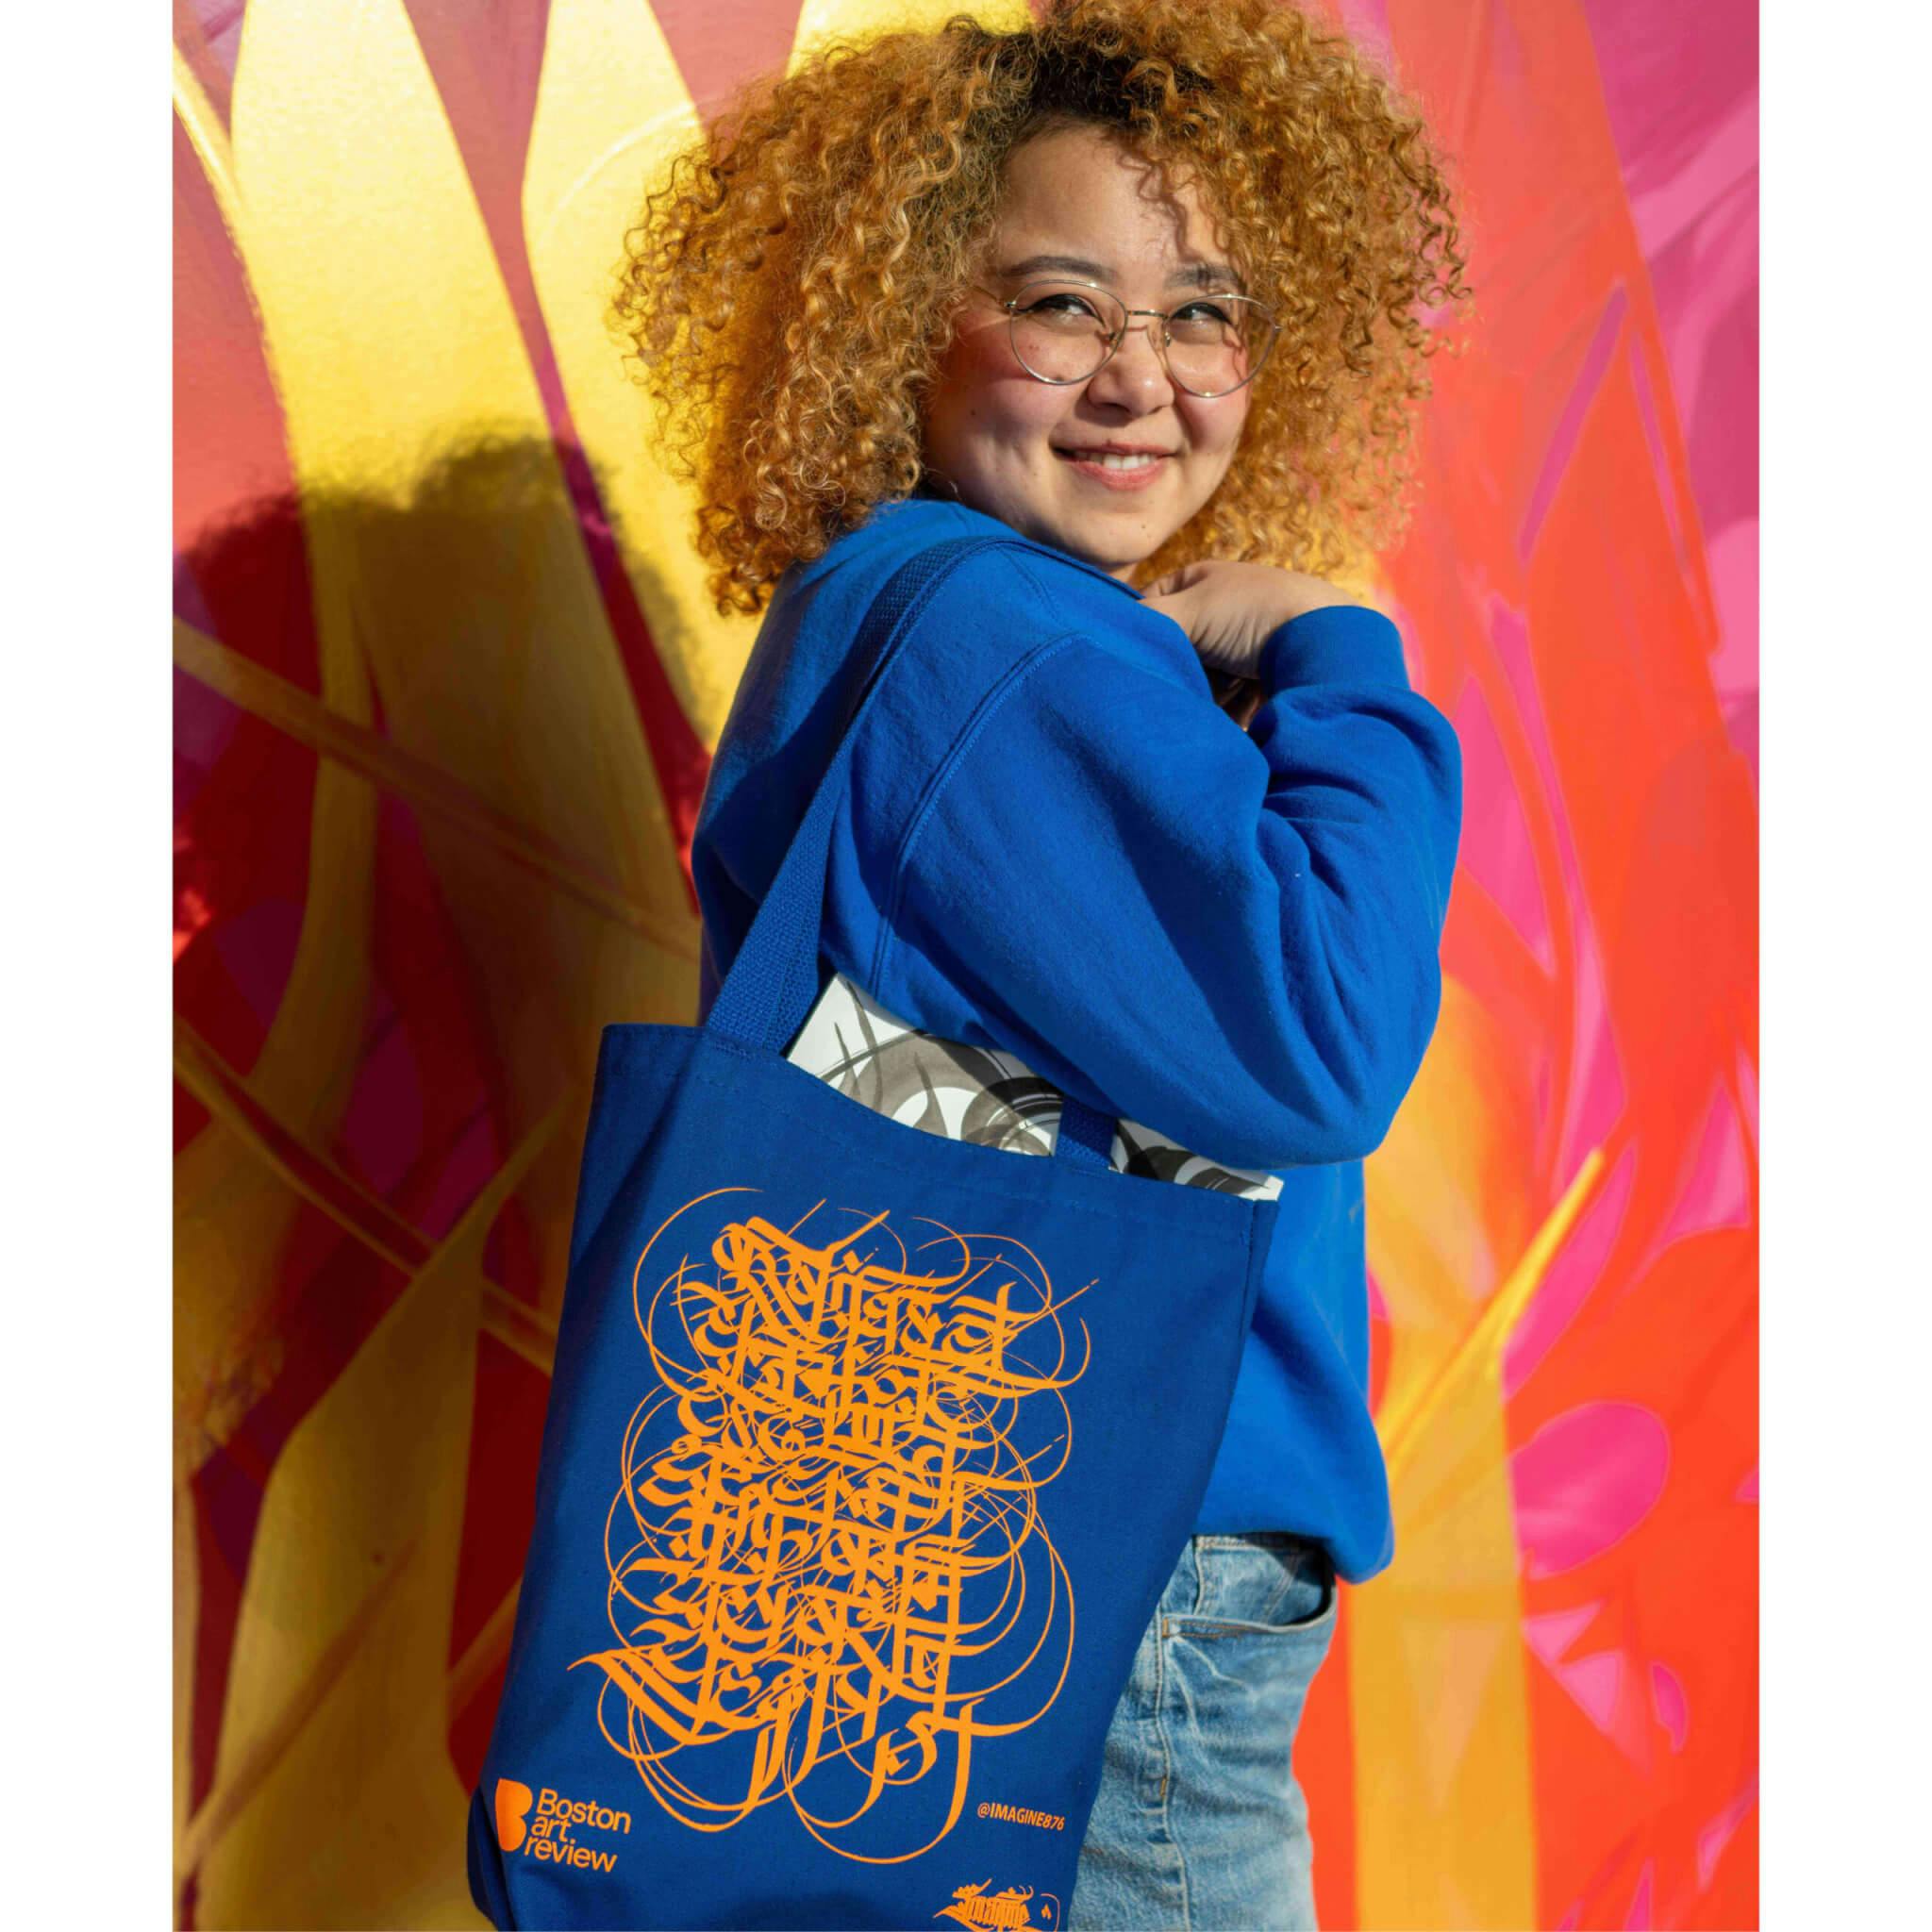 Sneha Shrestha, a young medium-light skinned woman with blonde hair, smiles while modeling the blue and orange tote bag she designed with Boston Art Review.